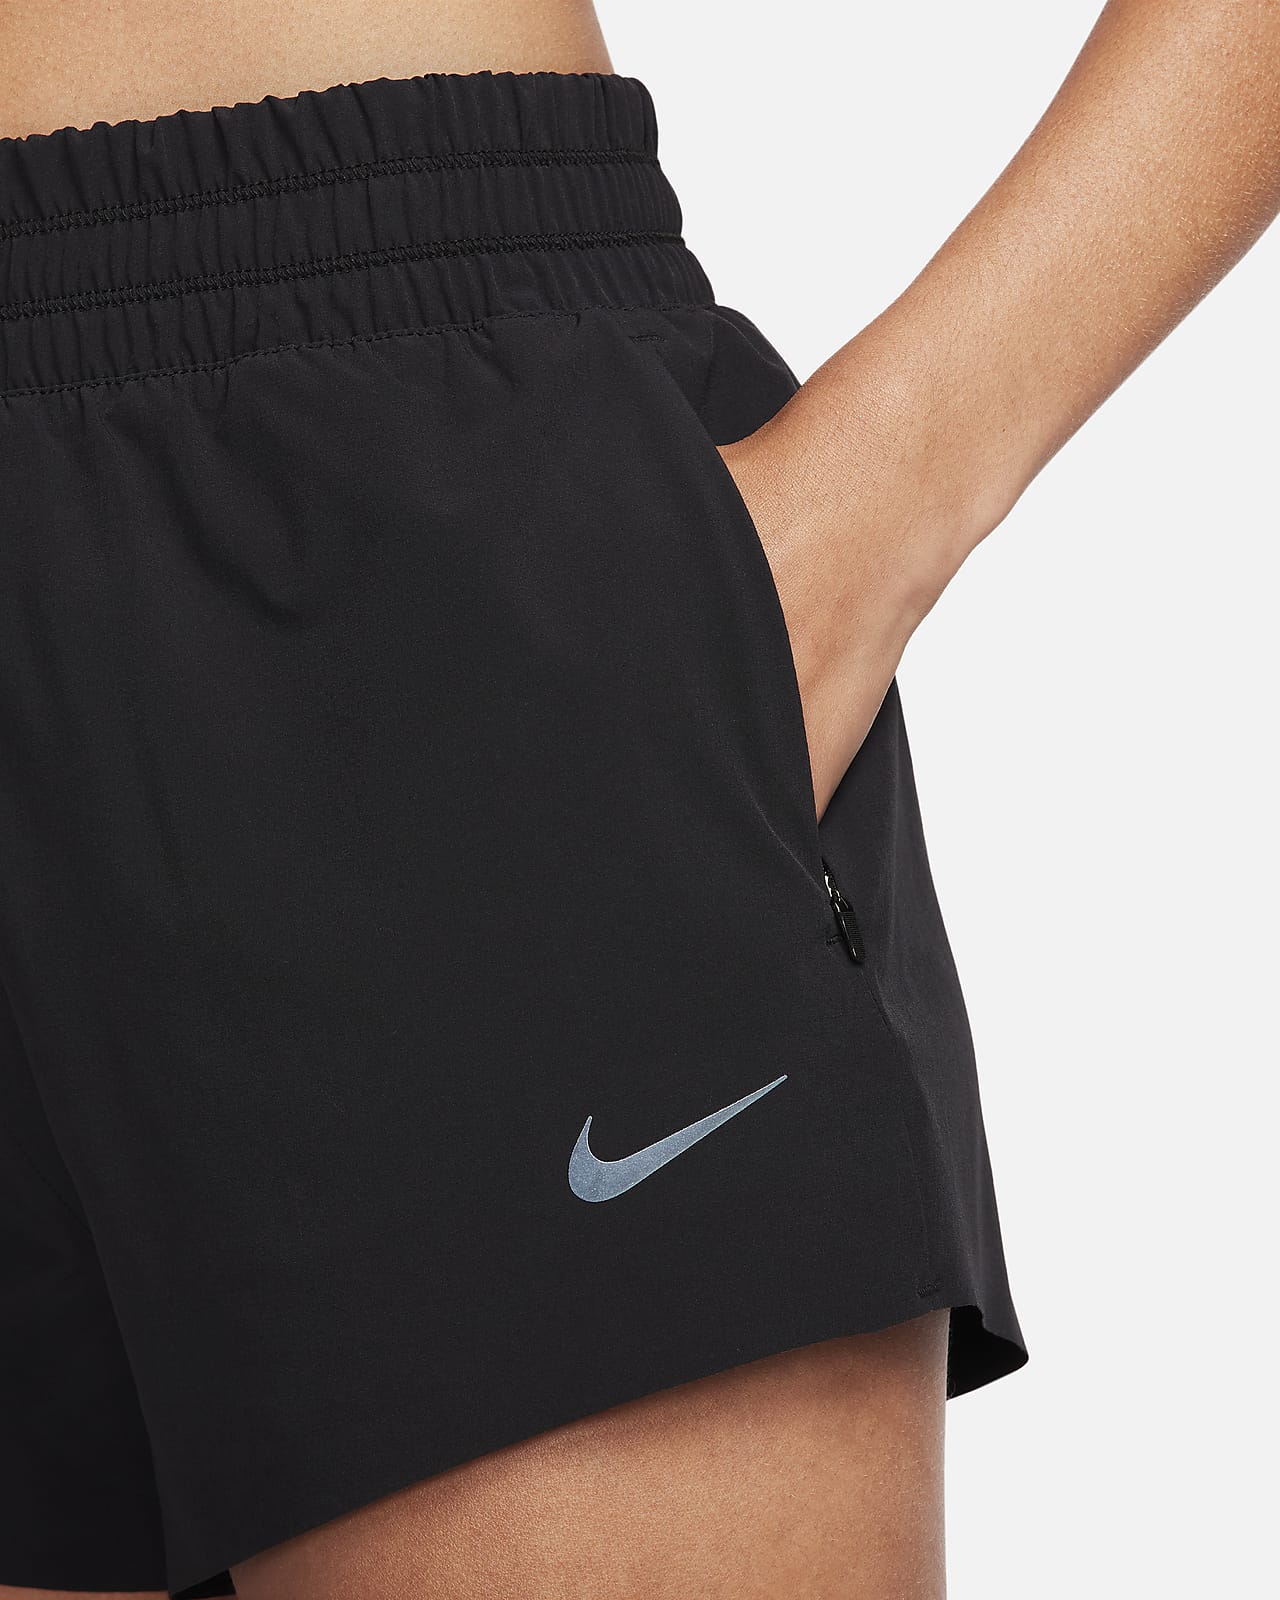 Nike Dri-FIT Running Division Women's High-Waisted 7.5cm (approx.)  Brief-Lined Running Shorts with Pockets